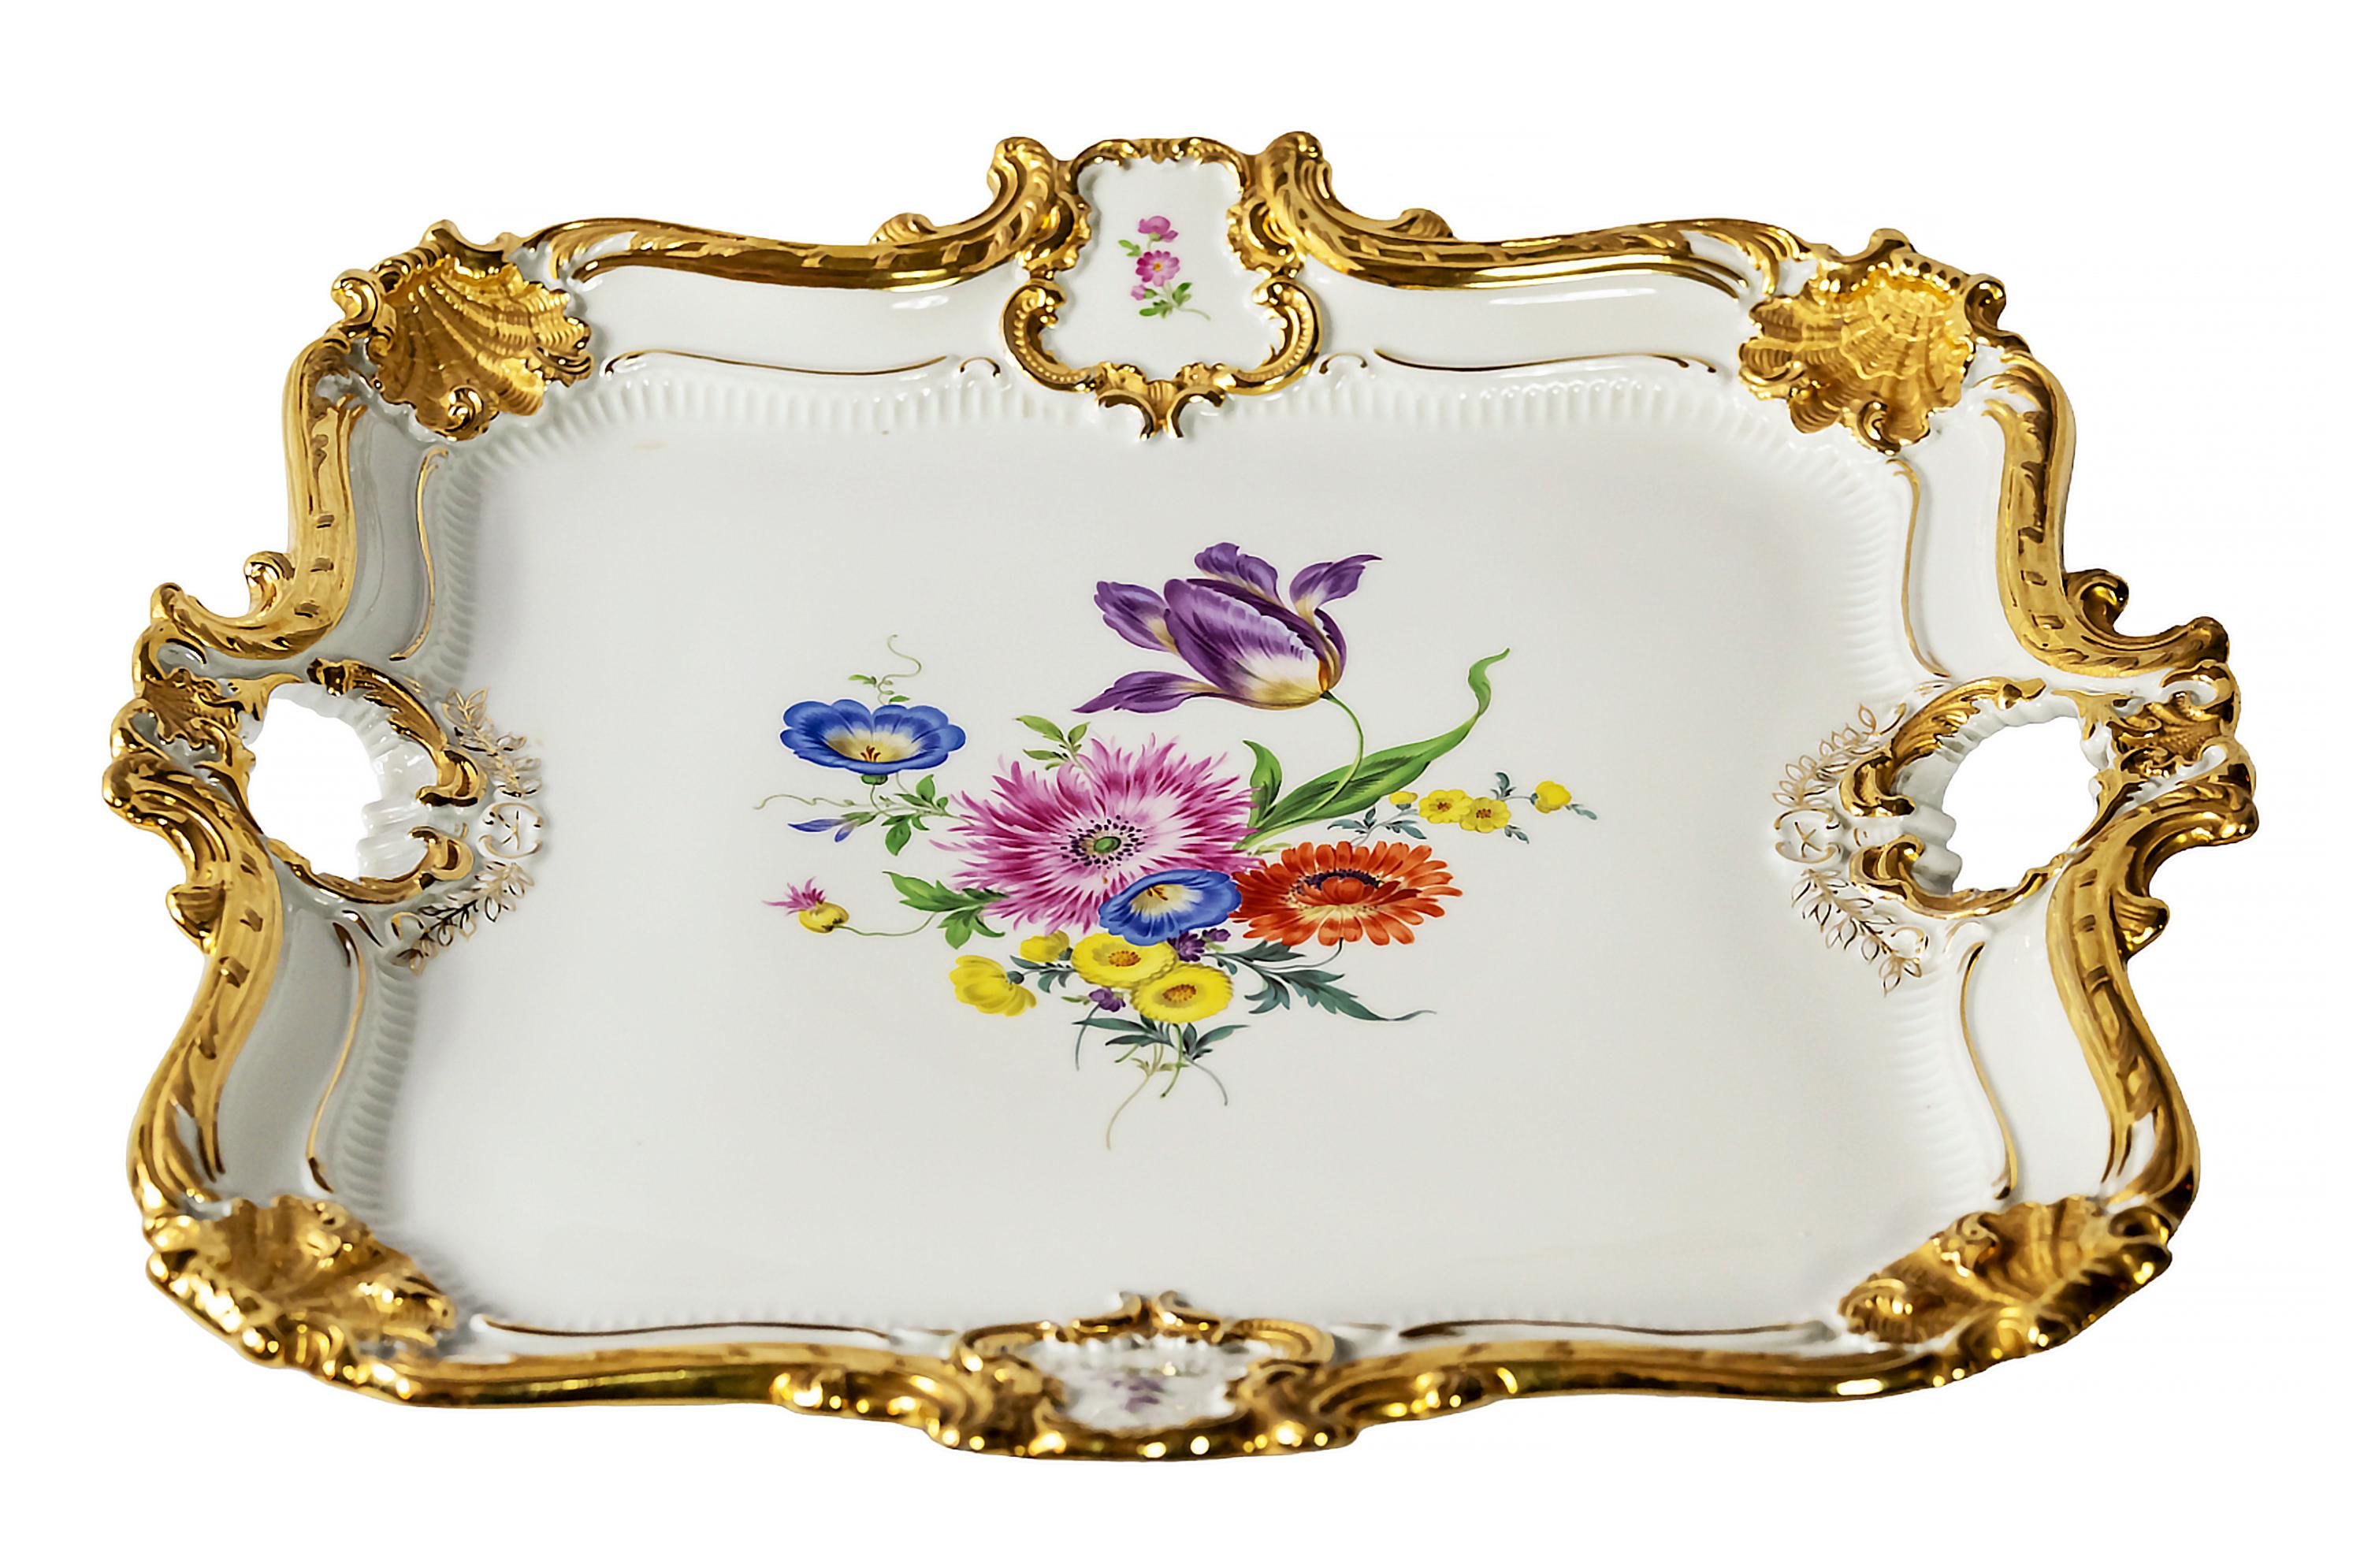 Large Meissen Porcelain serving plate/tray with hand painted floral motives and rich gold decor.
Marked on the bottom. Sword with two slashes.